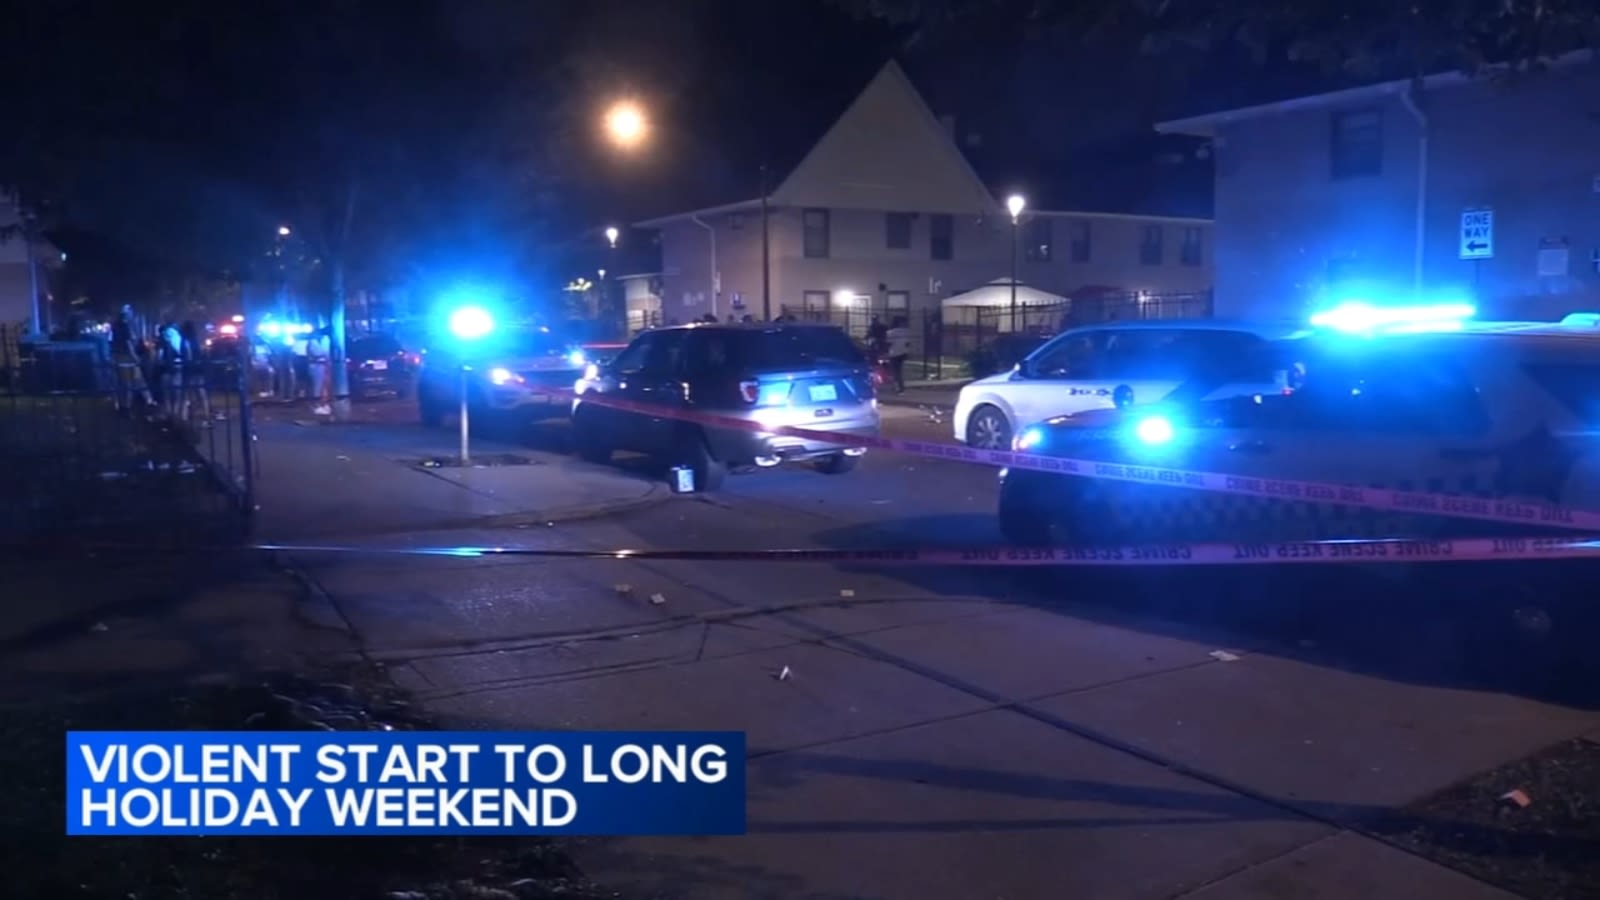 Chicago shootings: At least 58 shot, 11 fatally, in holiday weekend gun violence across city: police